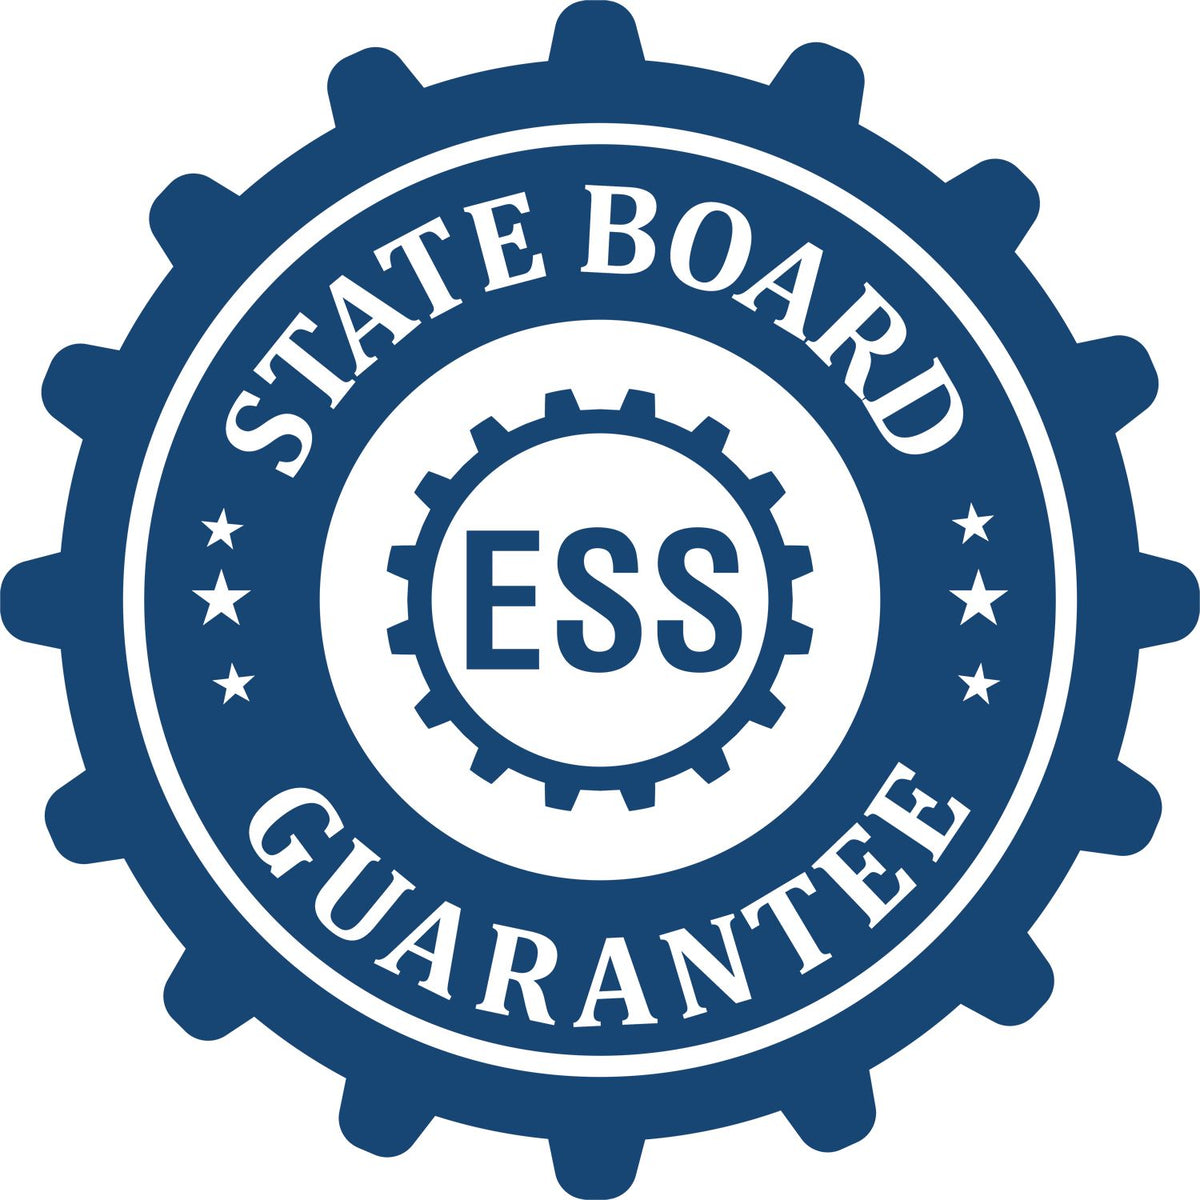 An emblem in a gear shape illustrating a state board guarantee for the Hybrid Mississippi Land Surveyor Seal